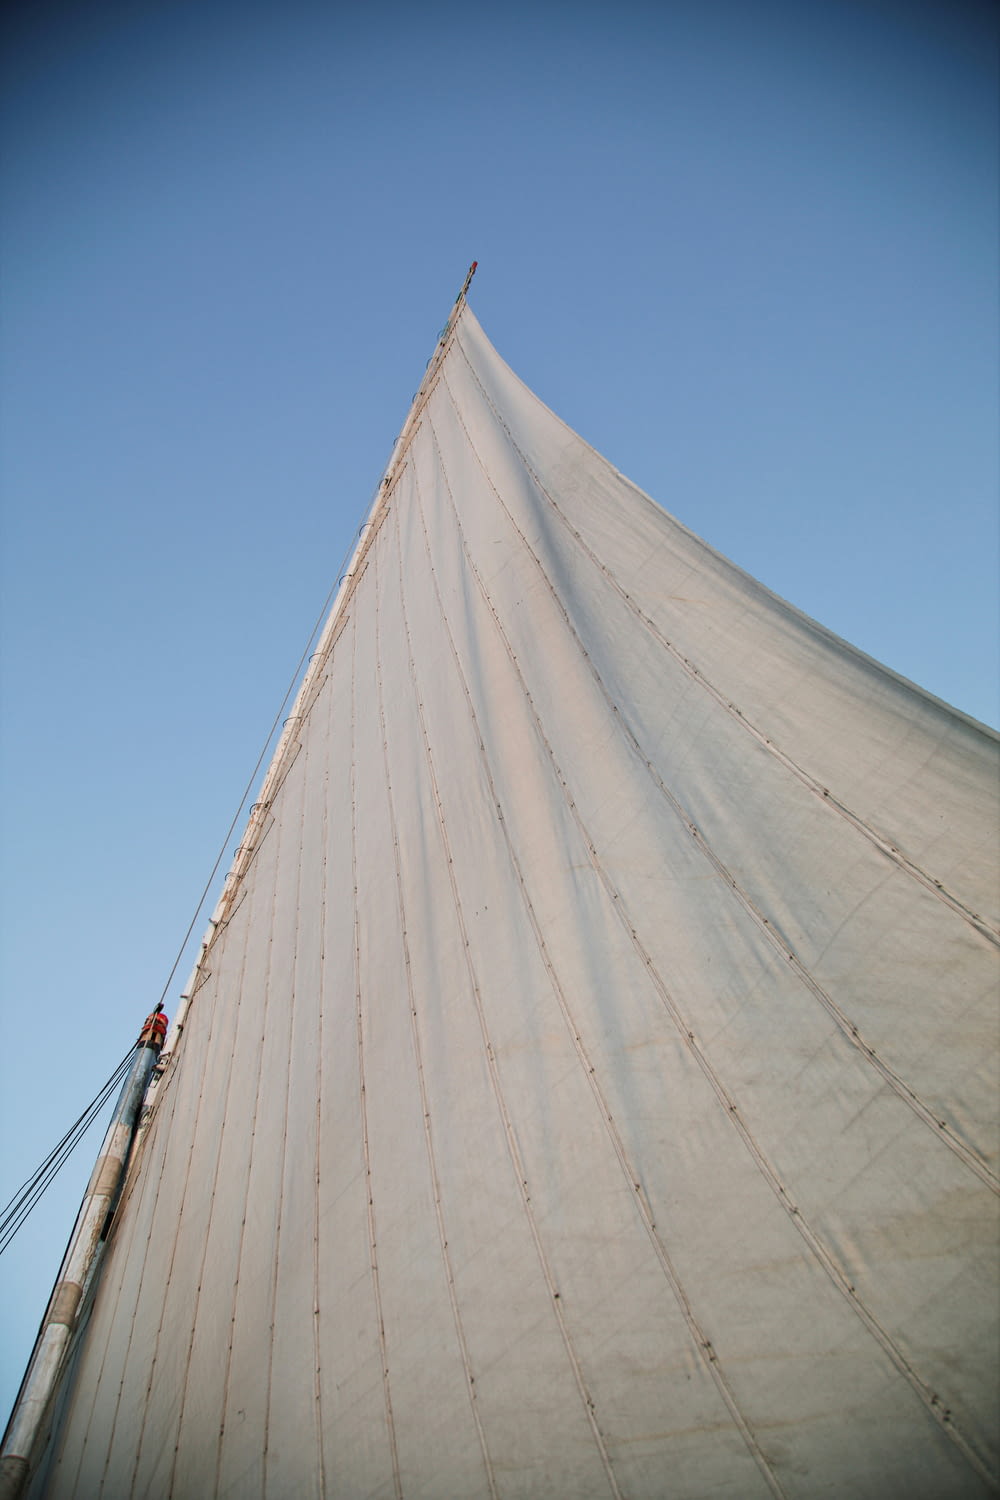 a person on a sailboat on a sunny day